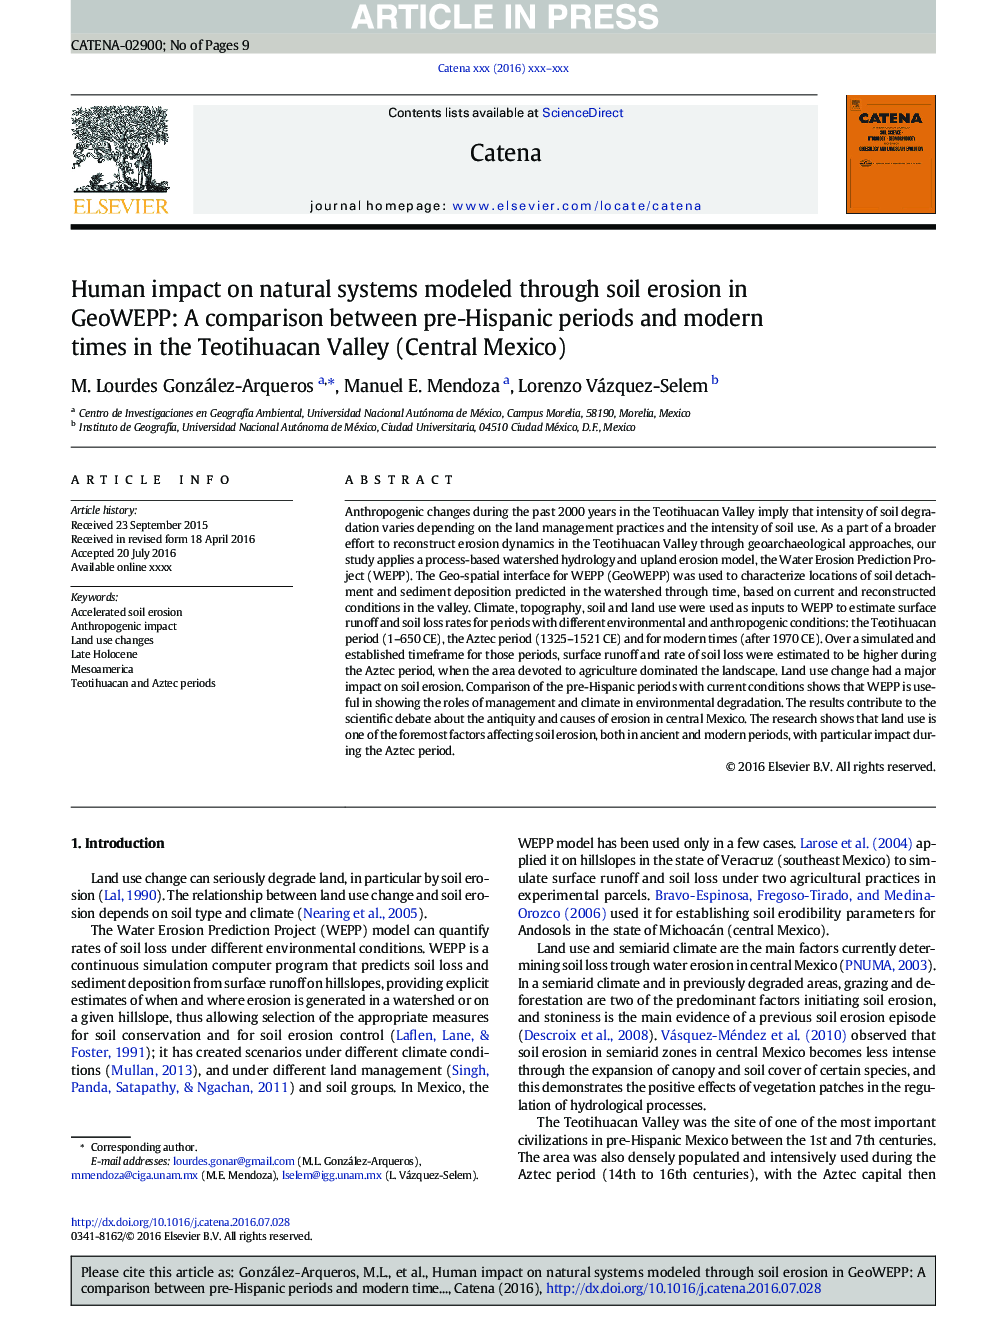 Human impact on natural systems modeled through soil erosion in GeoWEPP: A comparison between pre-Hispanic periods and modern times in the Teotihuacan Valley (Central Mexico)